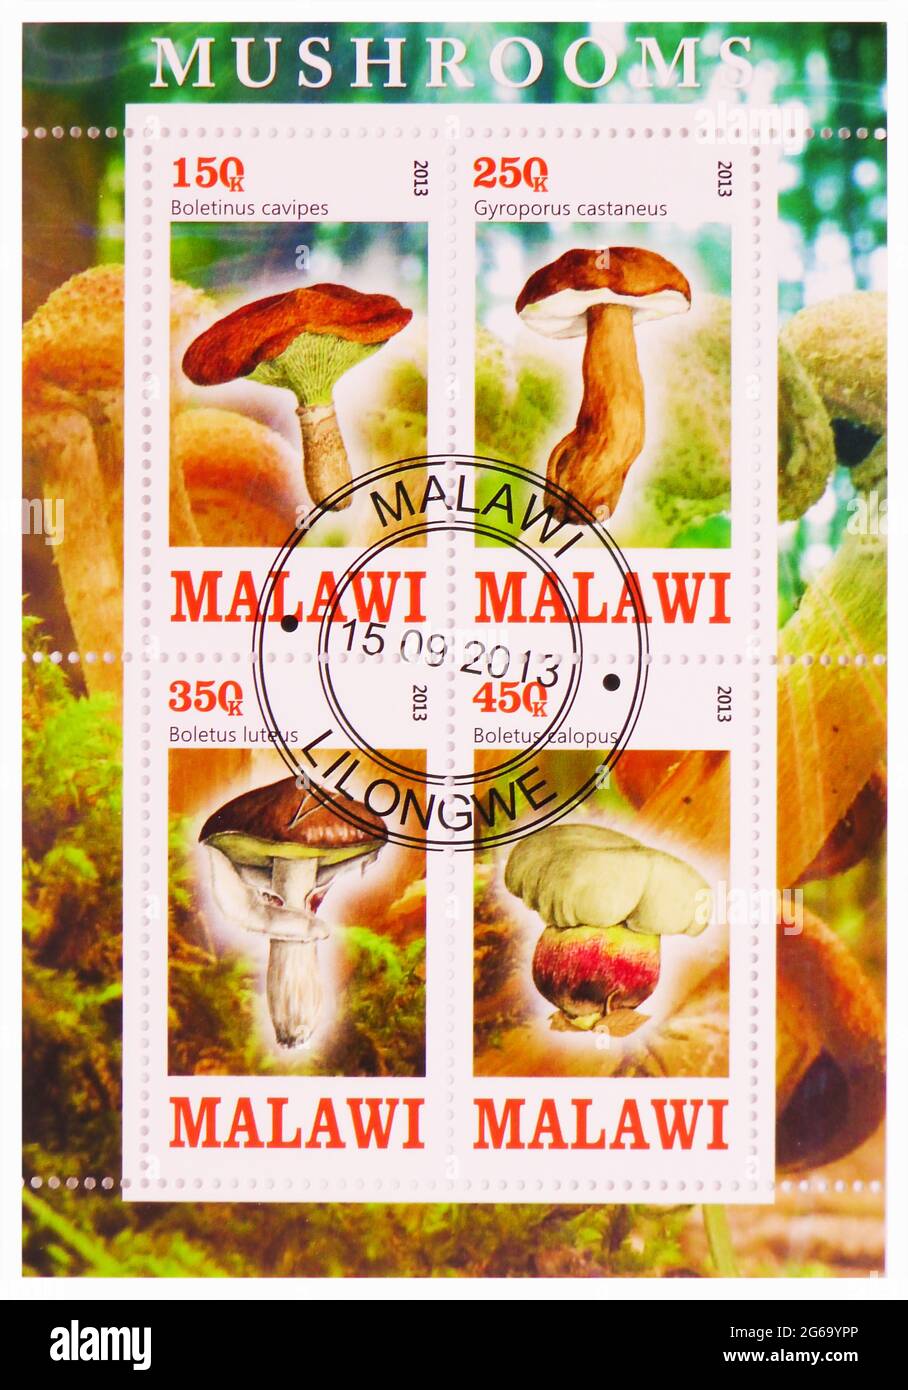 MOSCOW, RUSSIA - MARCH 28, 2020: Postage stamp printed in Malawi shows Mushrooms serie, circa 2013 Stock Photo